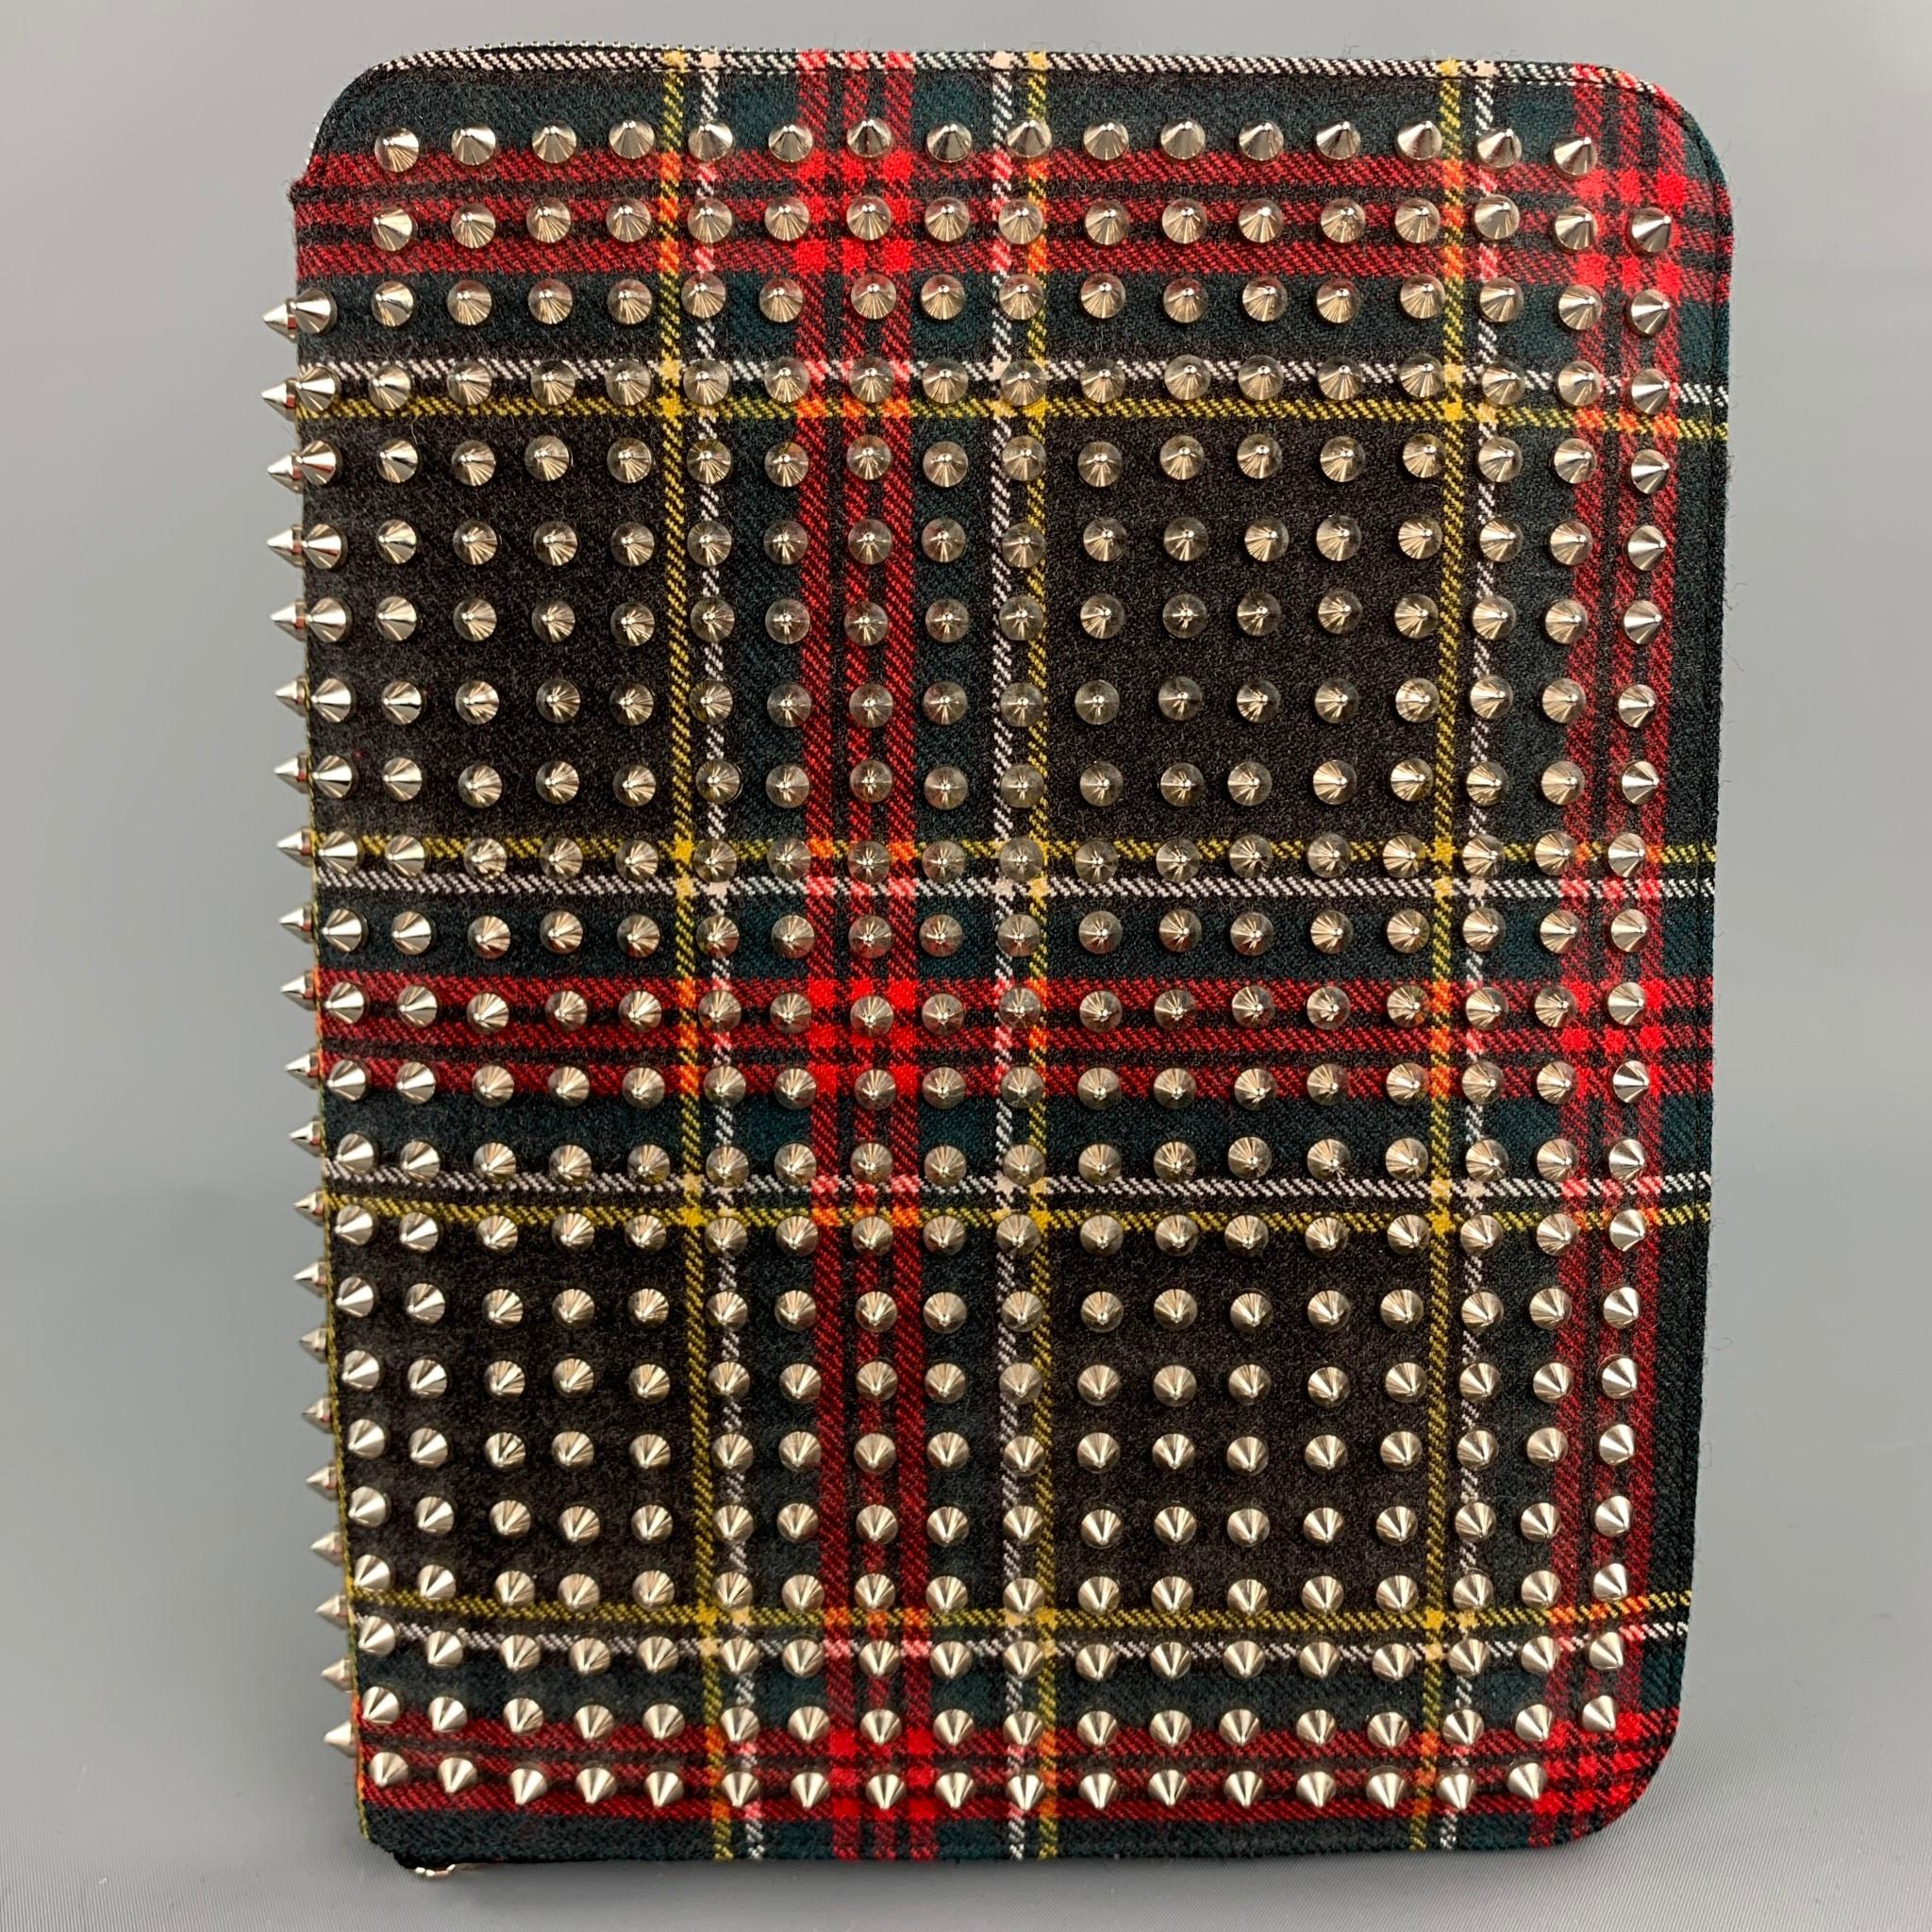 CHRISTIAN LOUBOUTIN iPad Case comes in a black & red plaid canvas with all over spike details featuring a leather strap, inner pocket, and a zip up closure. Fits a regular iPad.

Very Good Pre-Owned Condition.

Measurements:

Length: 8 in.
Height: